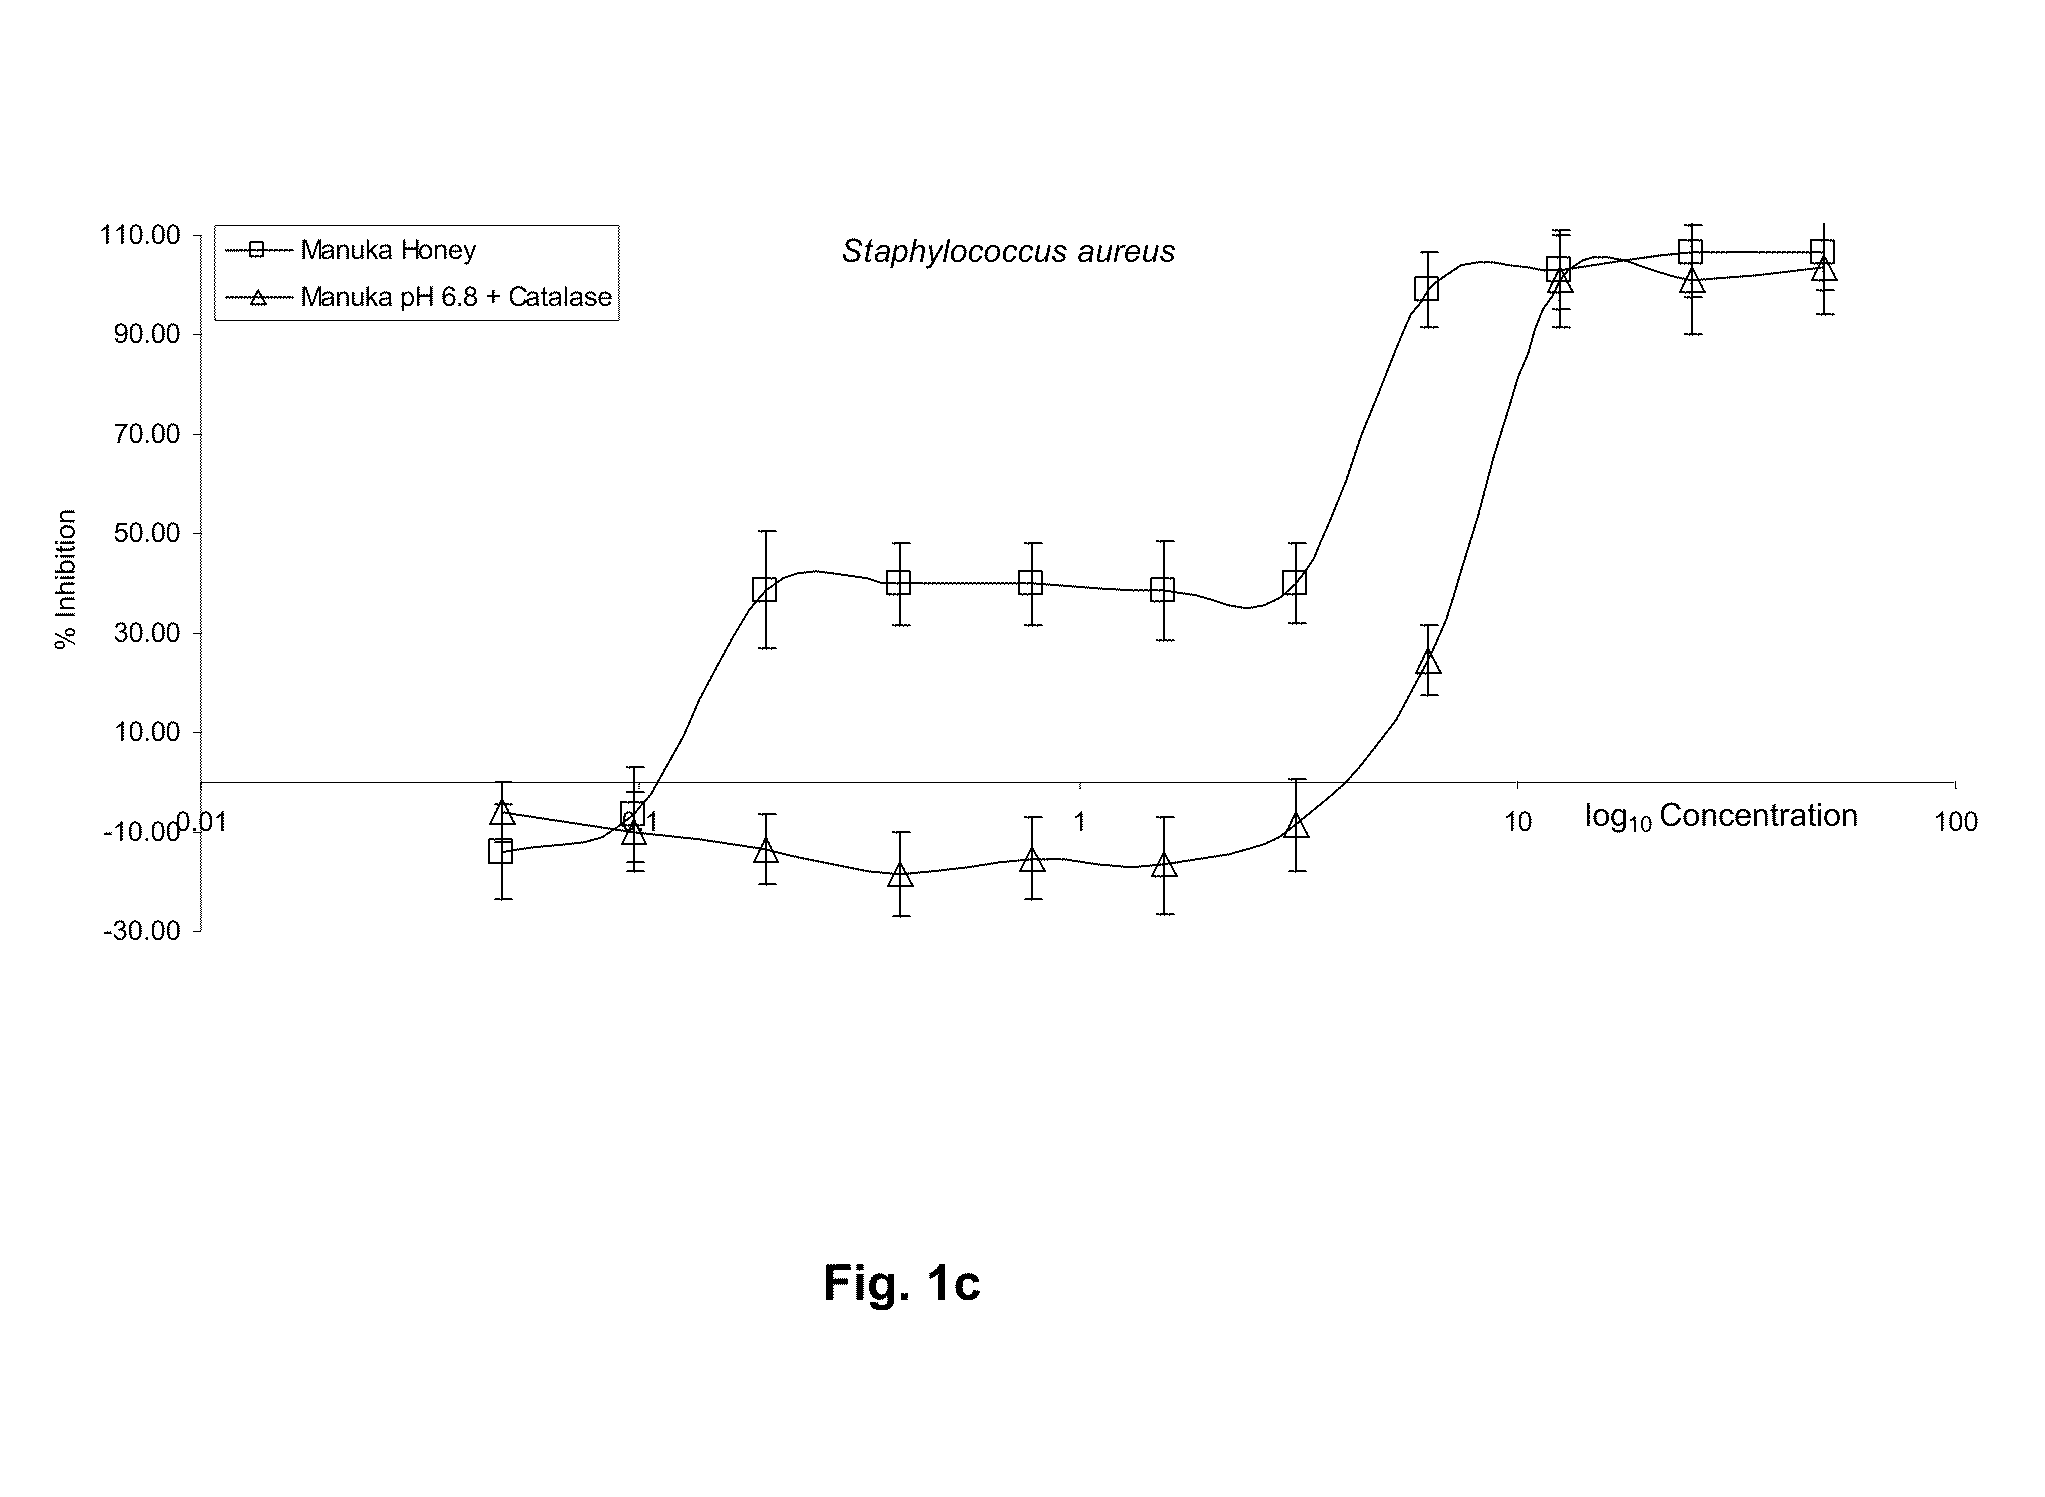 Formulation and method for the treatment of fungal nail infections